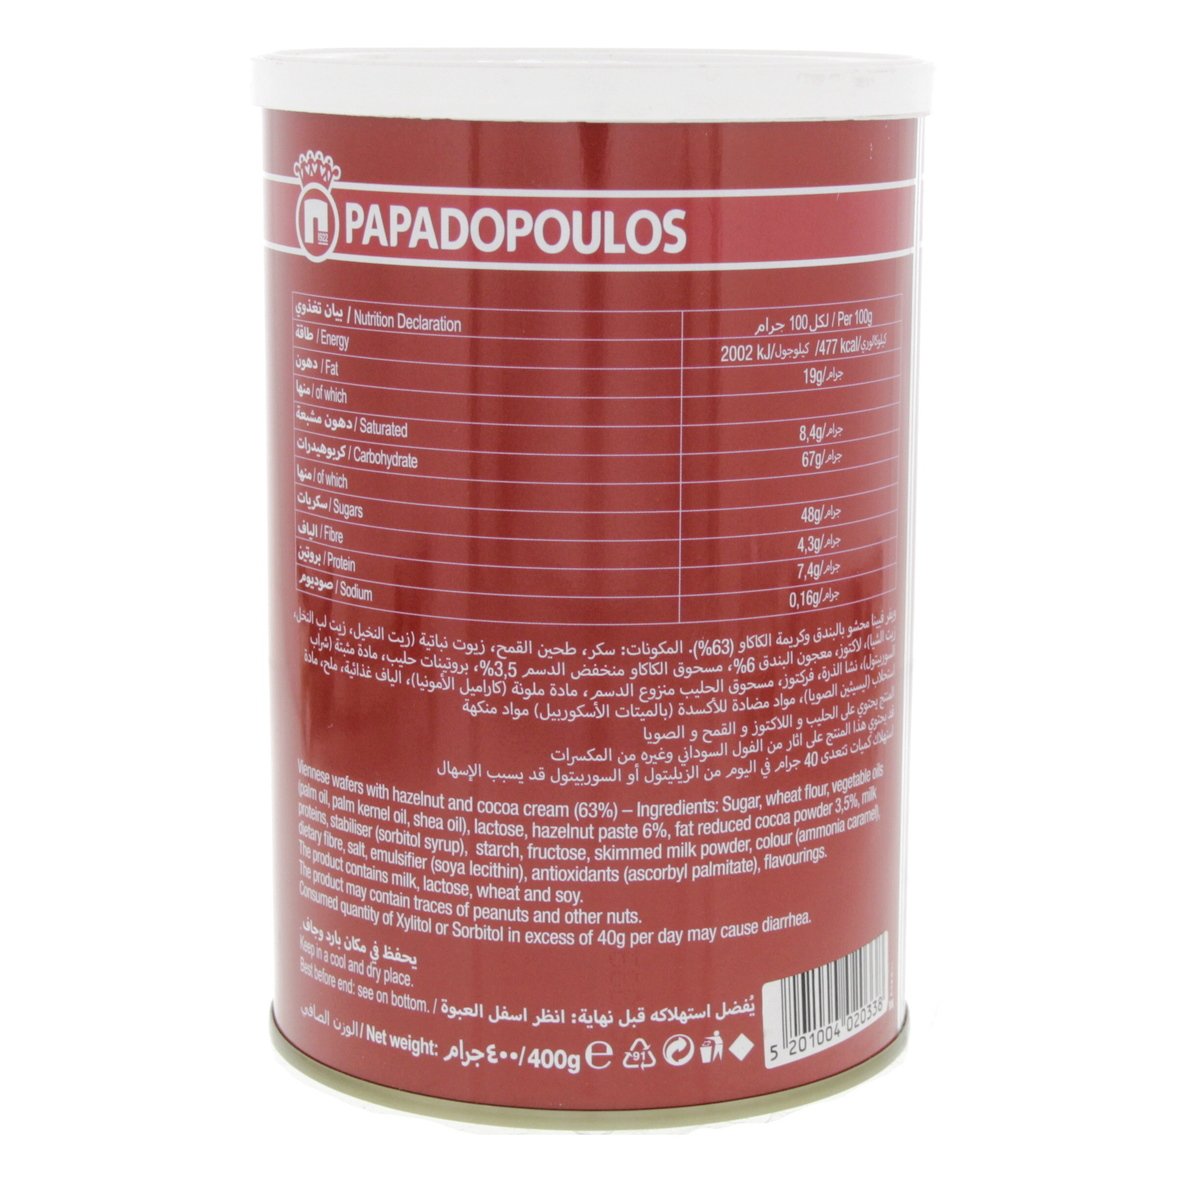 Papadopoulos Caprice Wafer Rolls Hazelnut And Cocoa Cream 400 g